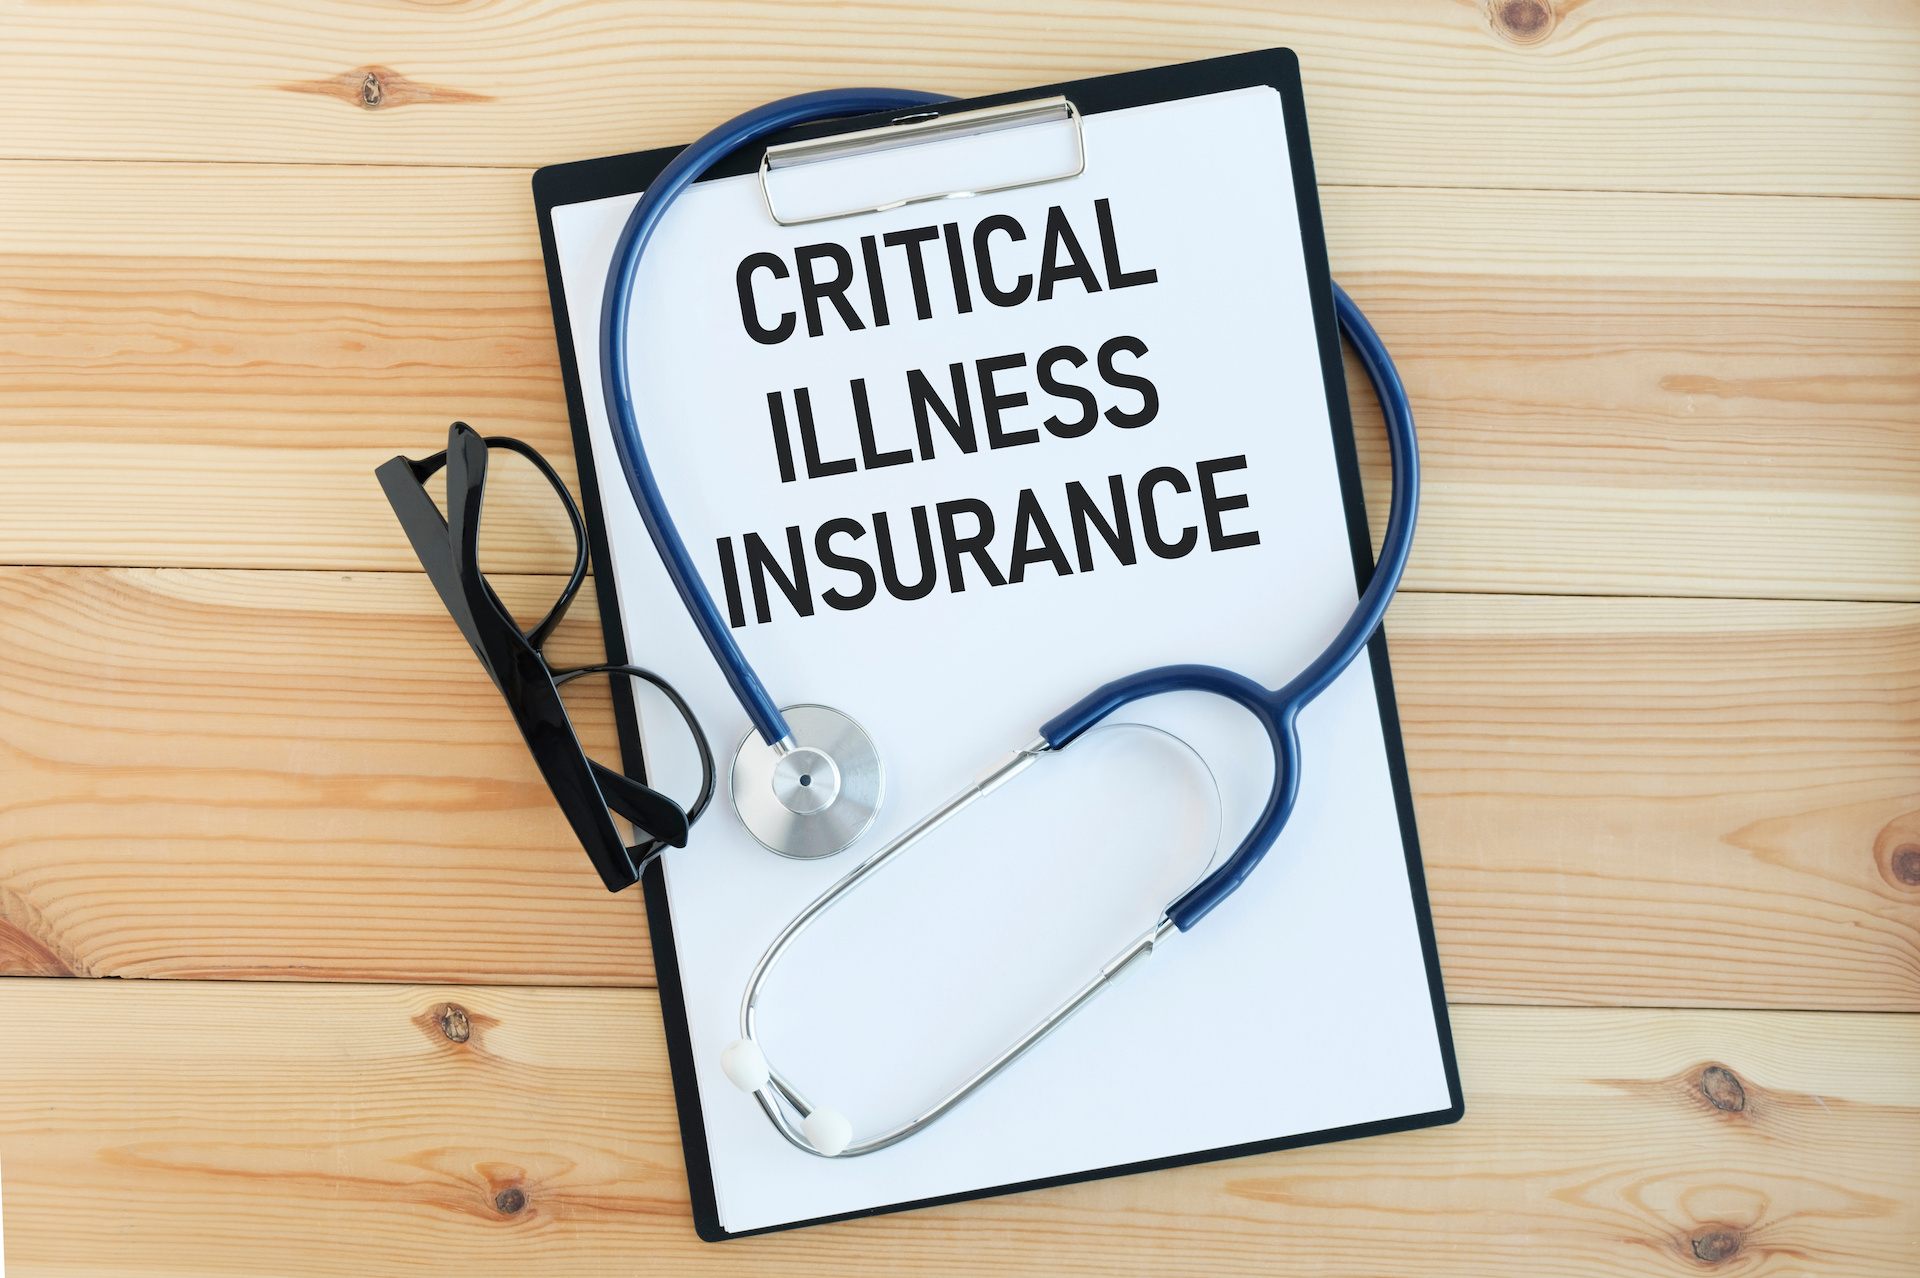 How important is critical illness insurance?